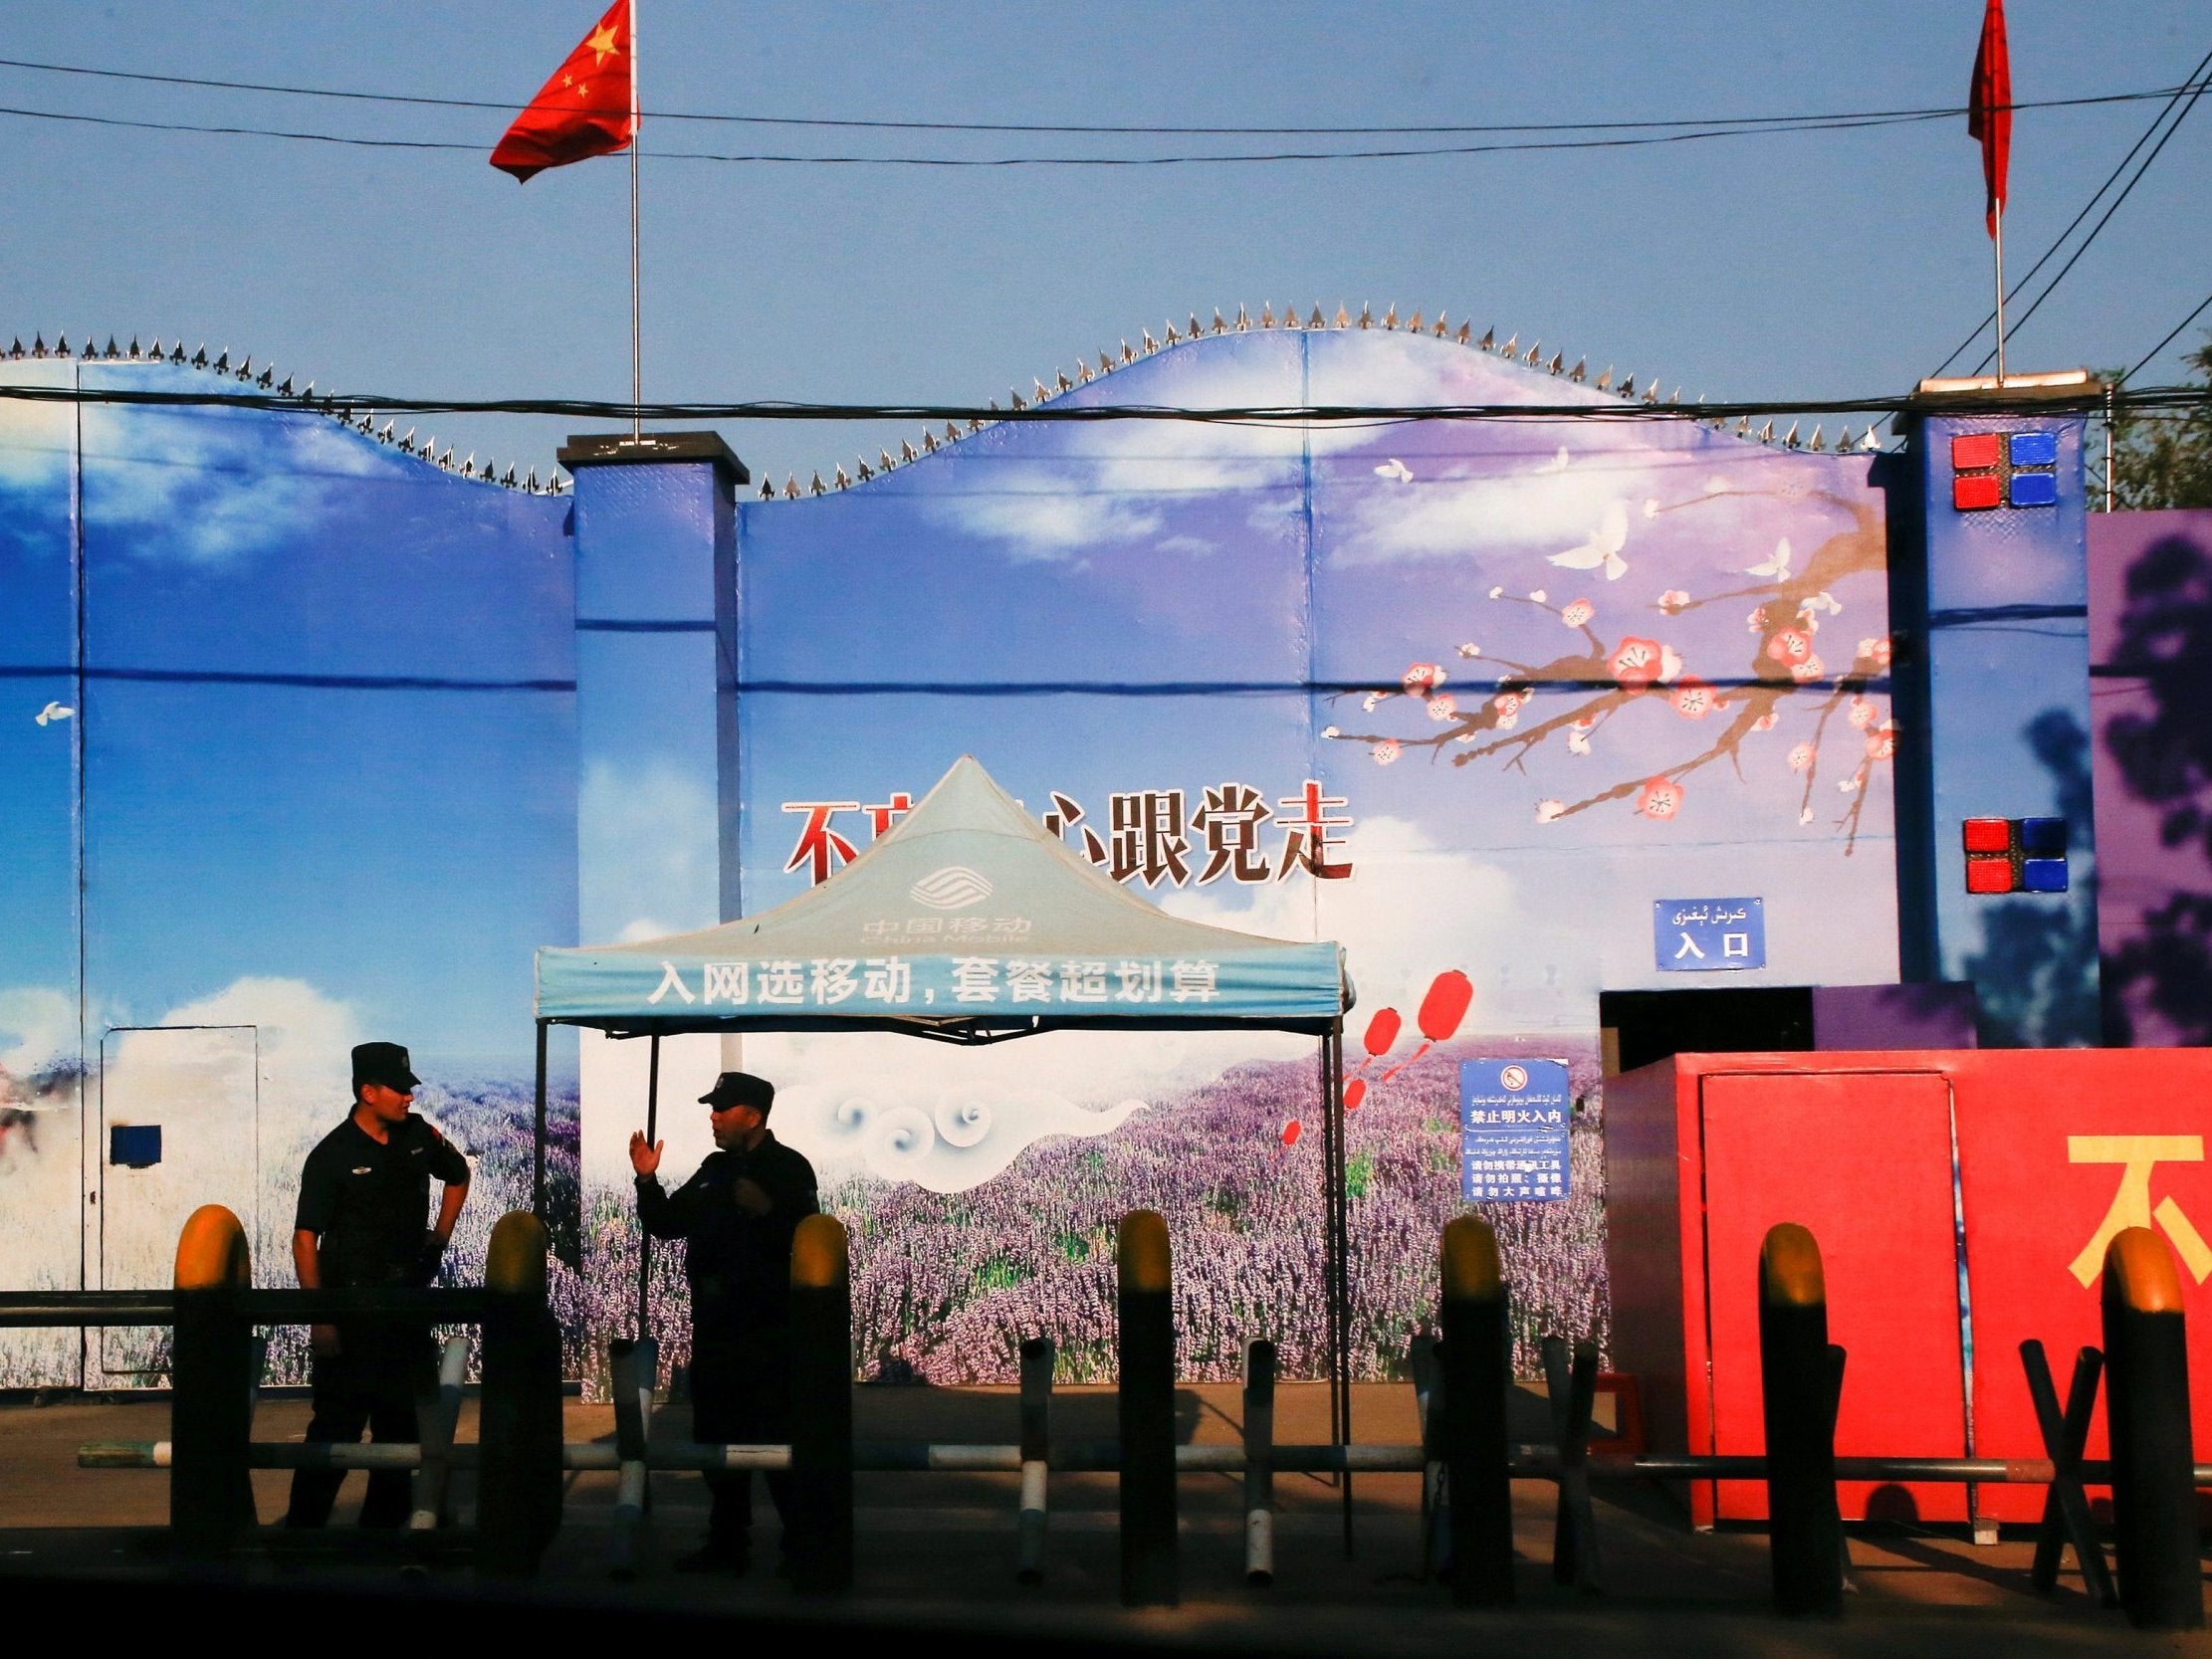 Security guards stand at the gates of what is officially known as a vocational skills education centre in Huocheng County in Xinjiang province